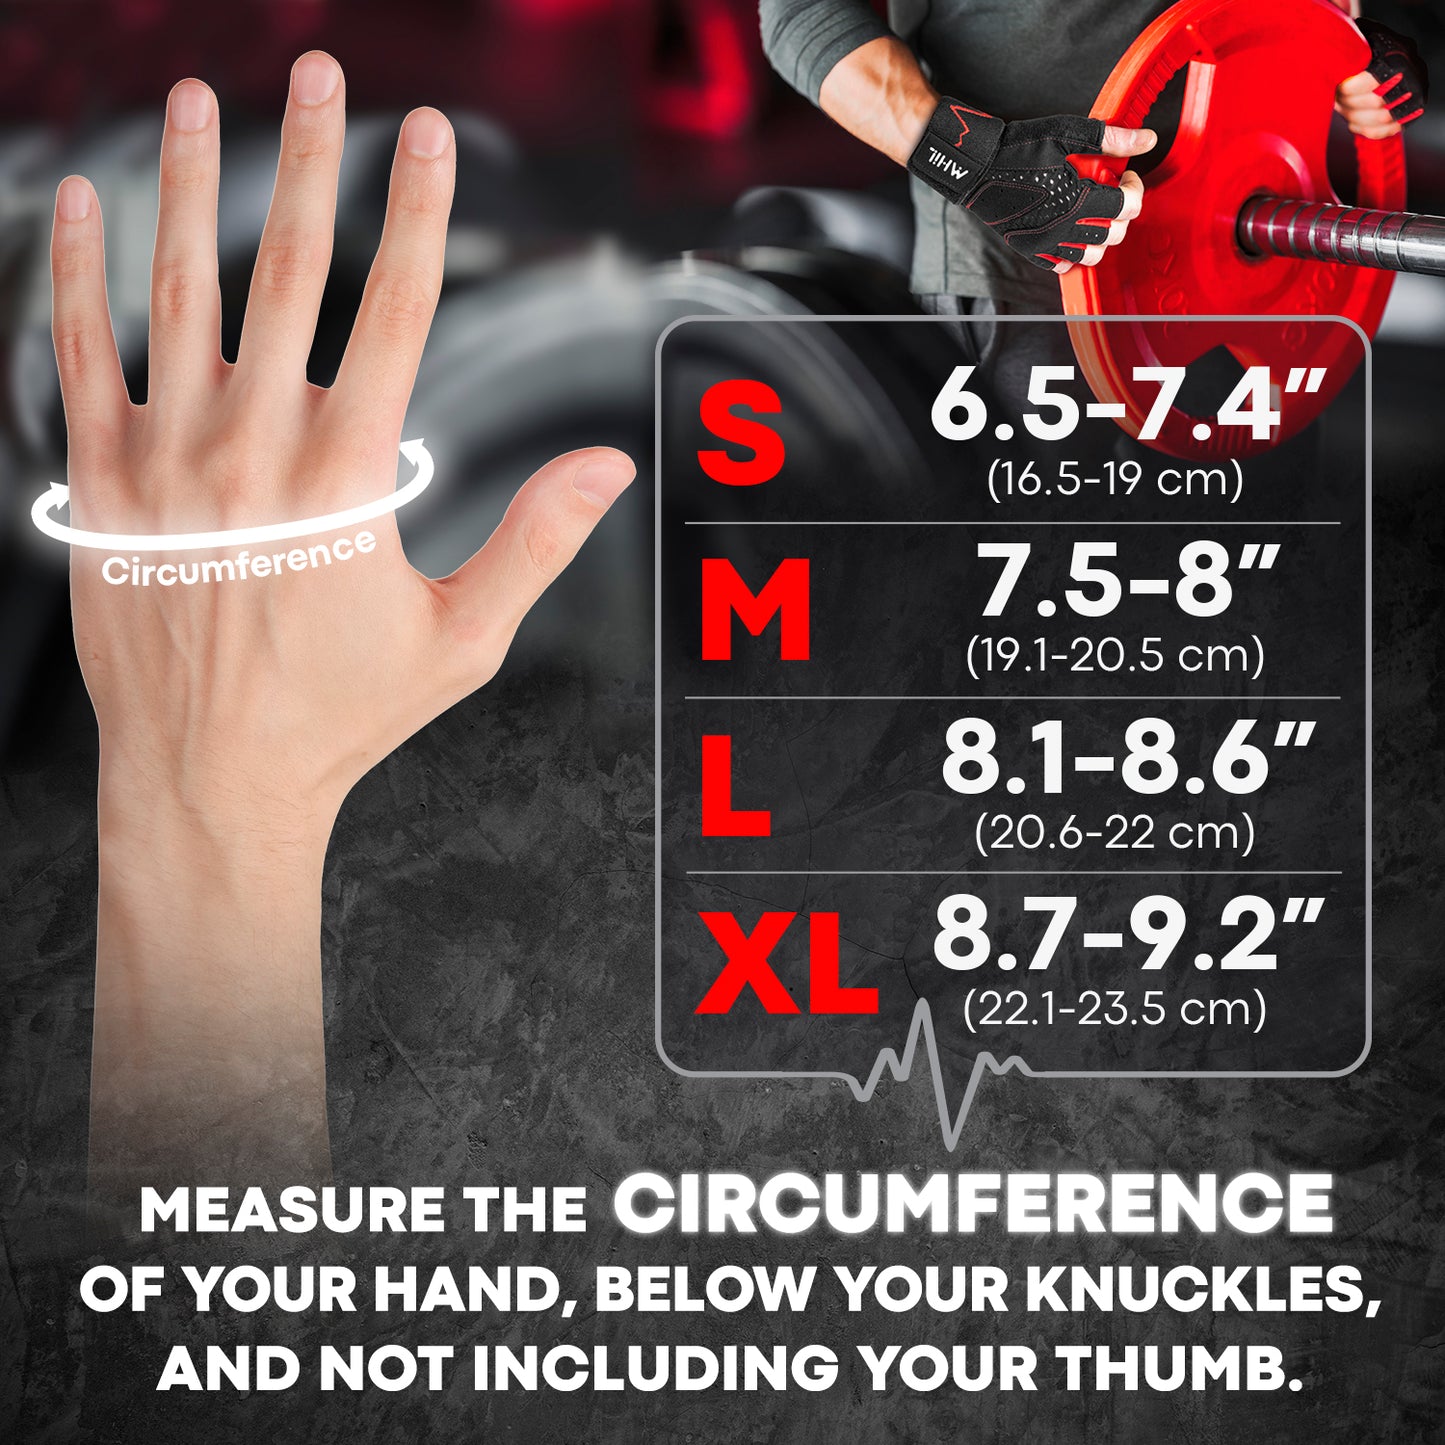 MHIL Workout Gloves Mens & Women's – mh-il